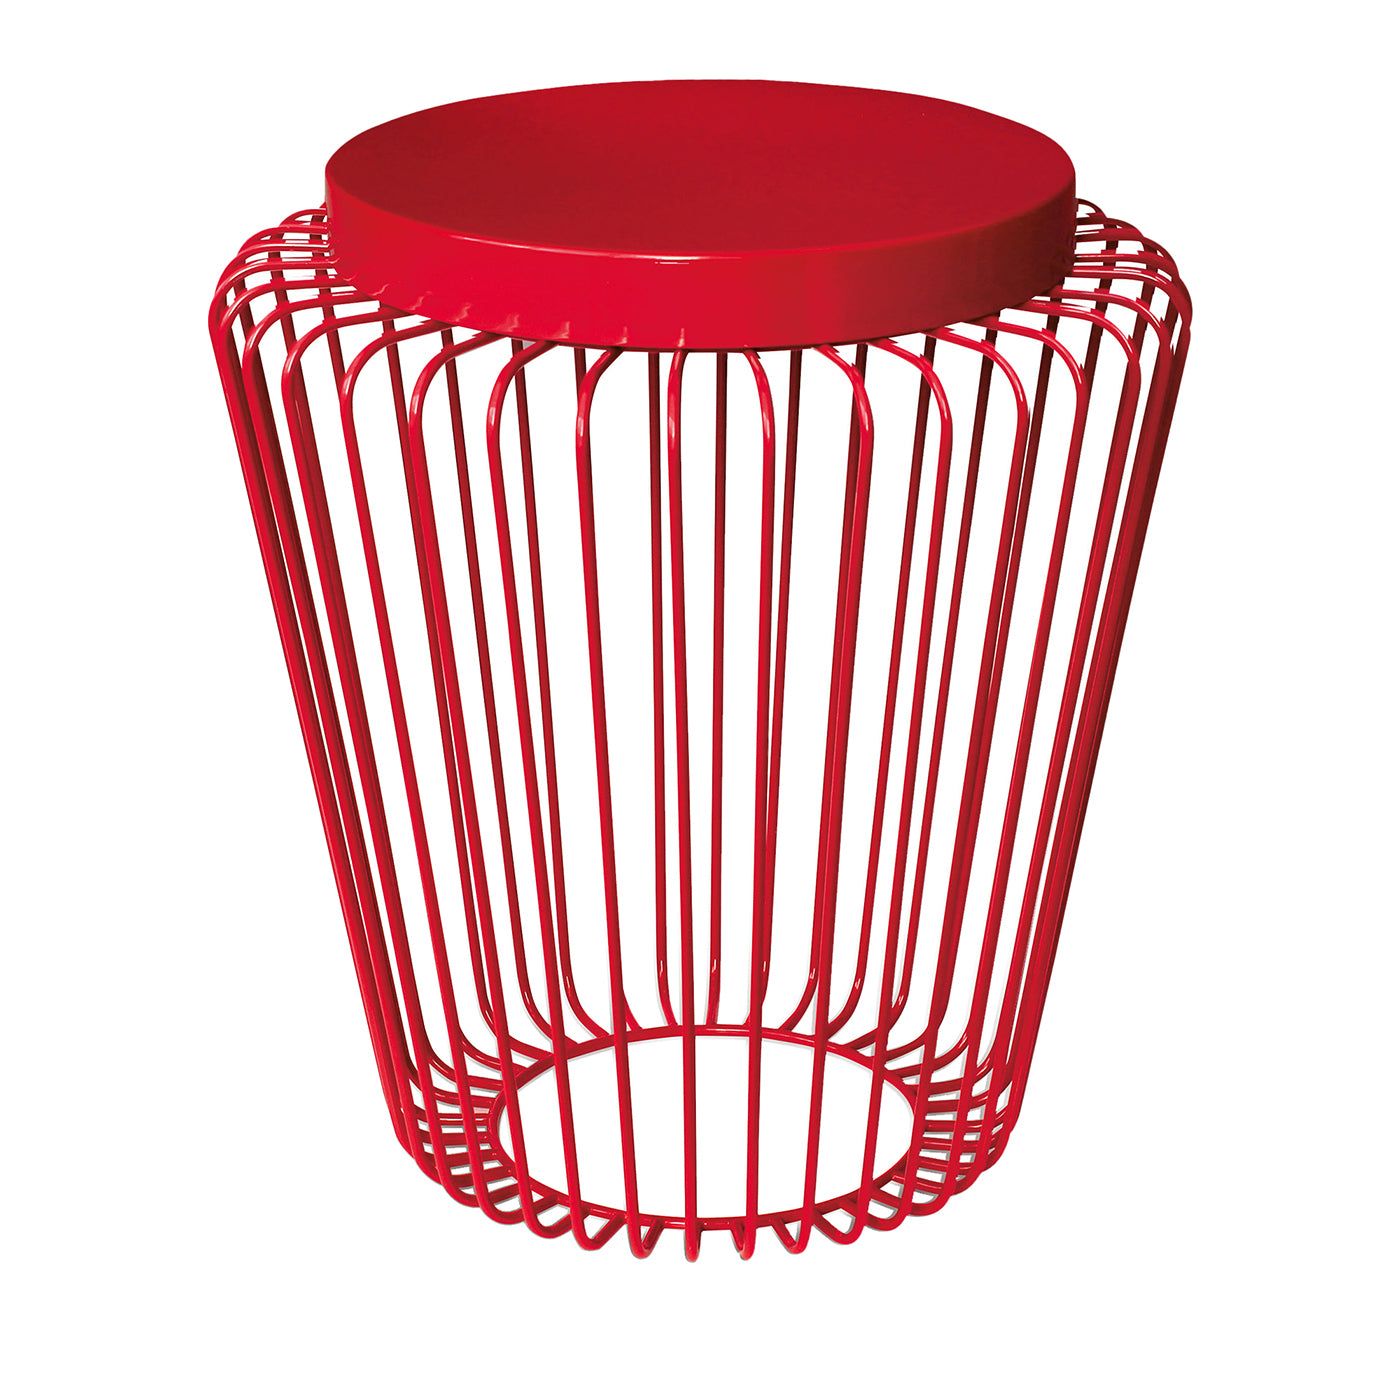 Cage Red Lantern by Stefano Tabarin - Main view